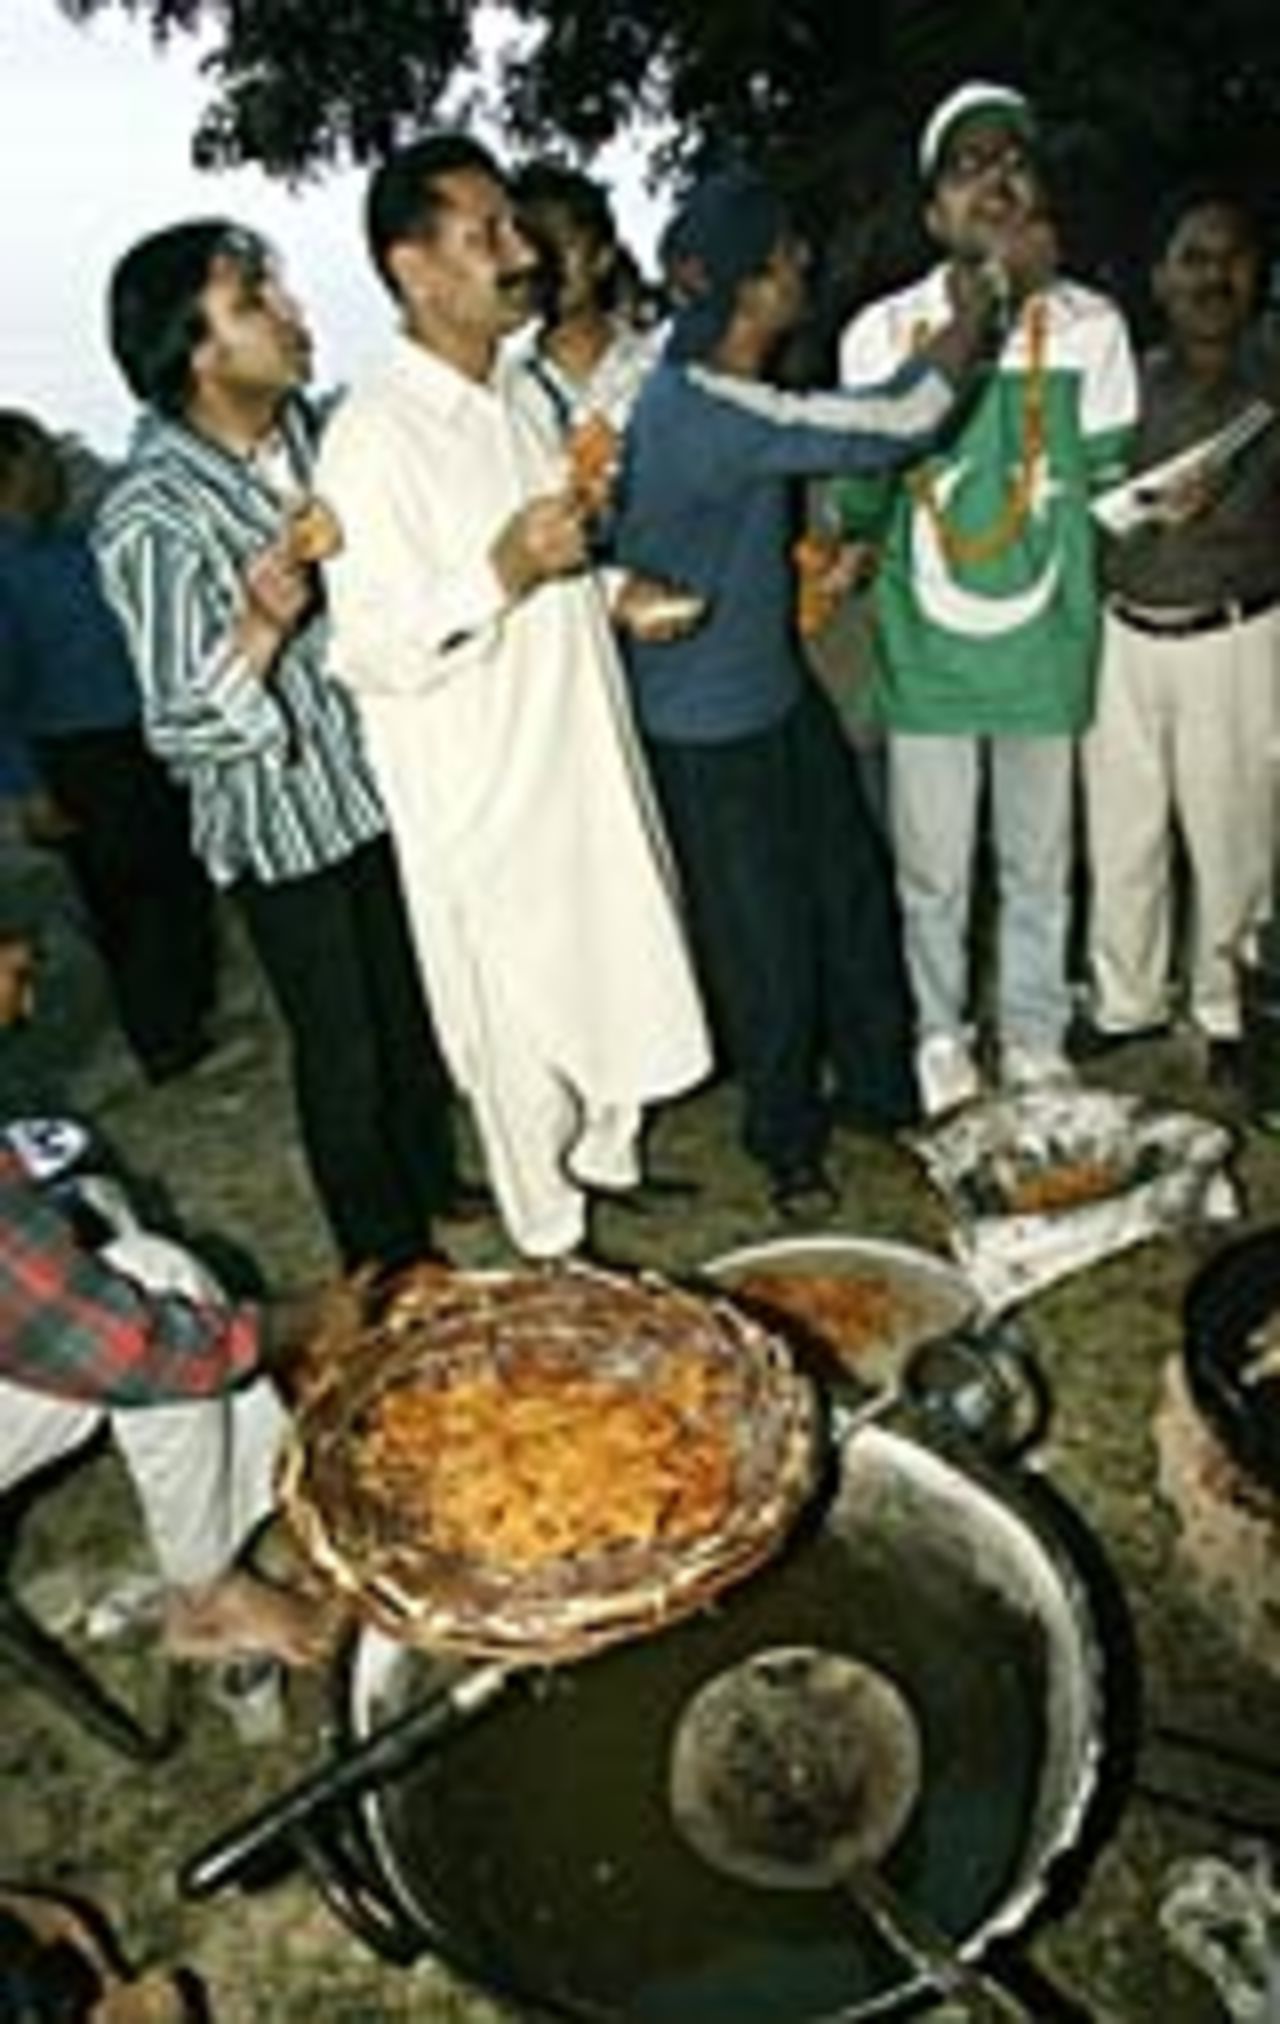 Pakistani cricket supporters are welcomed by Indian supporters with sweets, Chandigarh, March 7, 2005